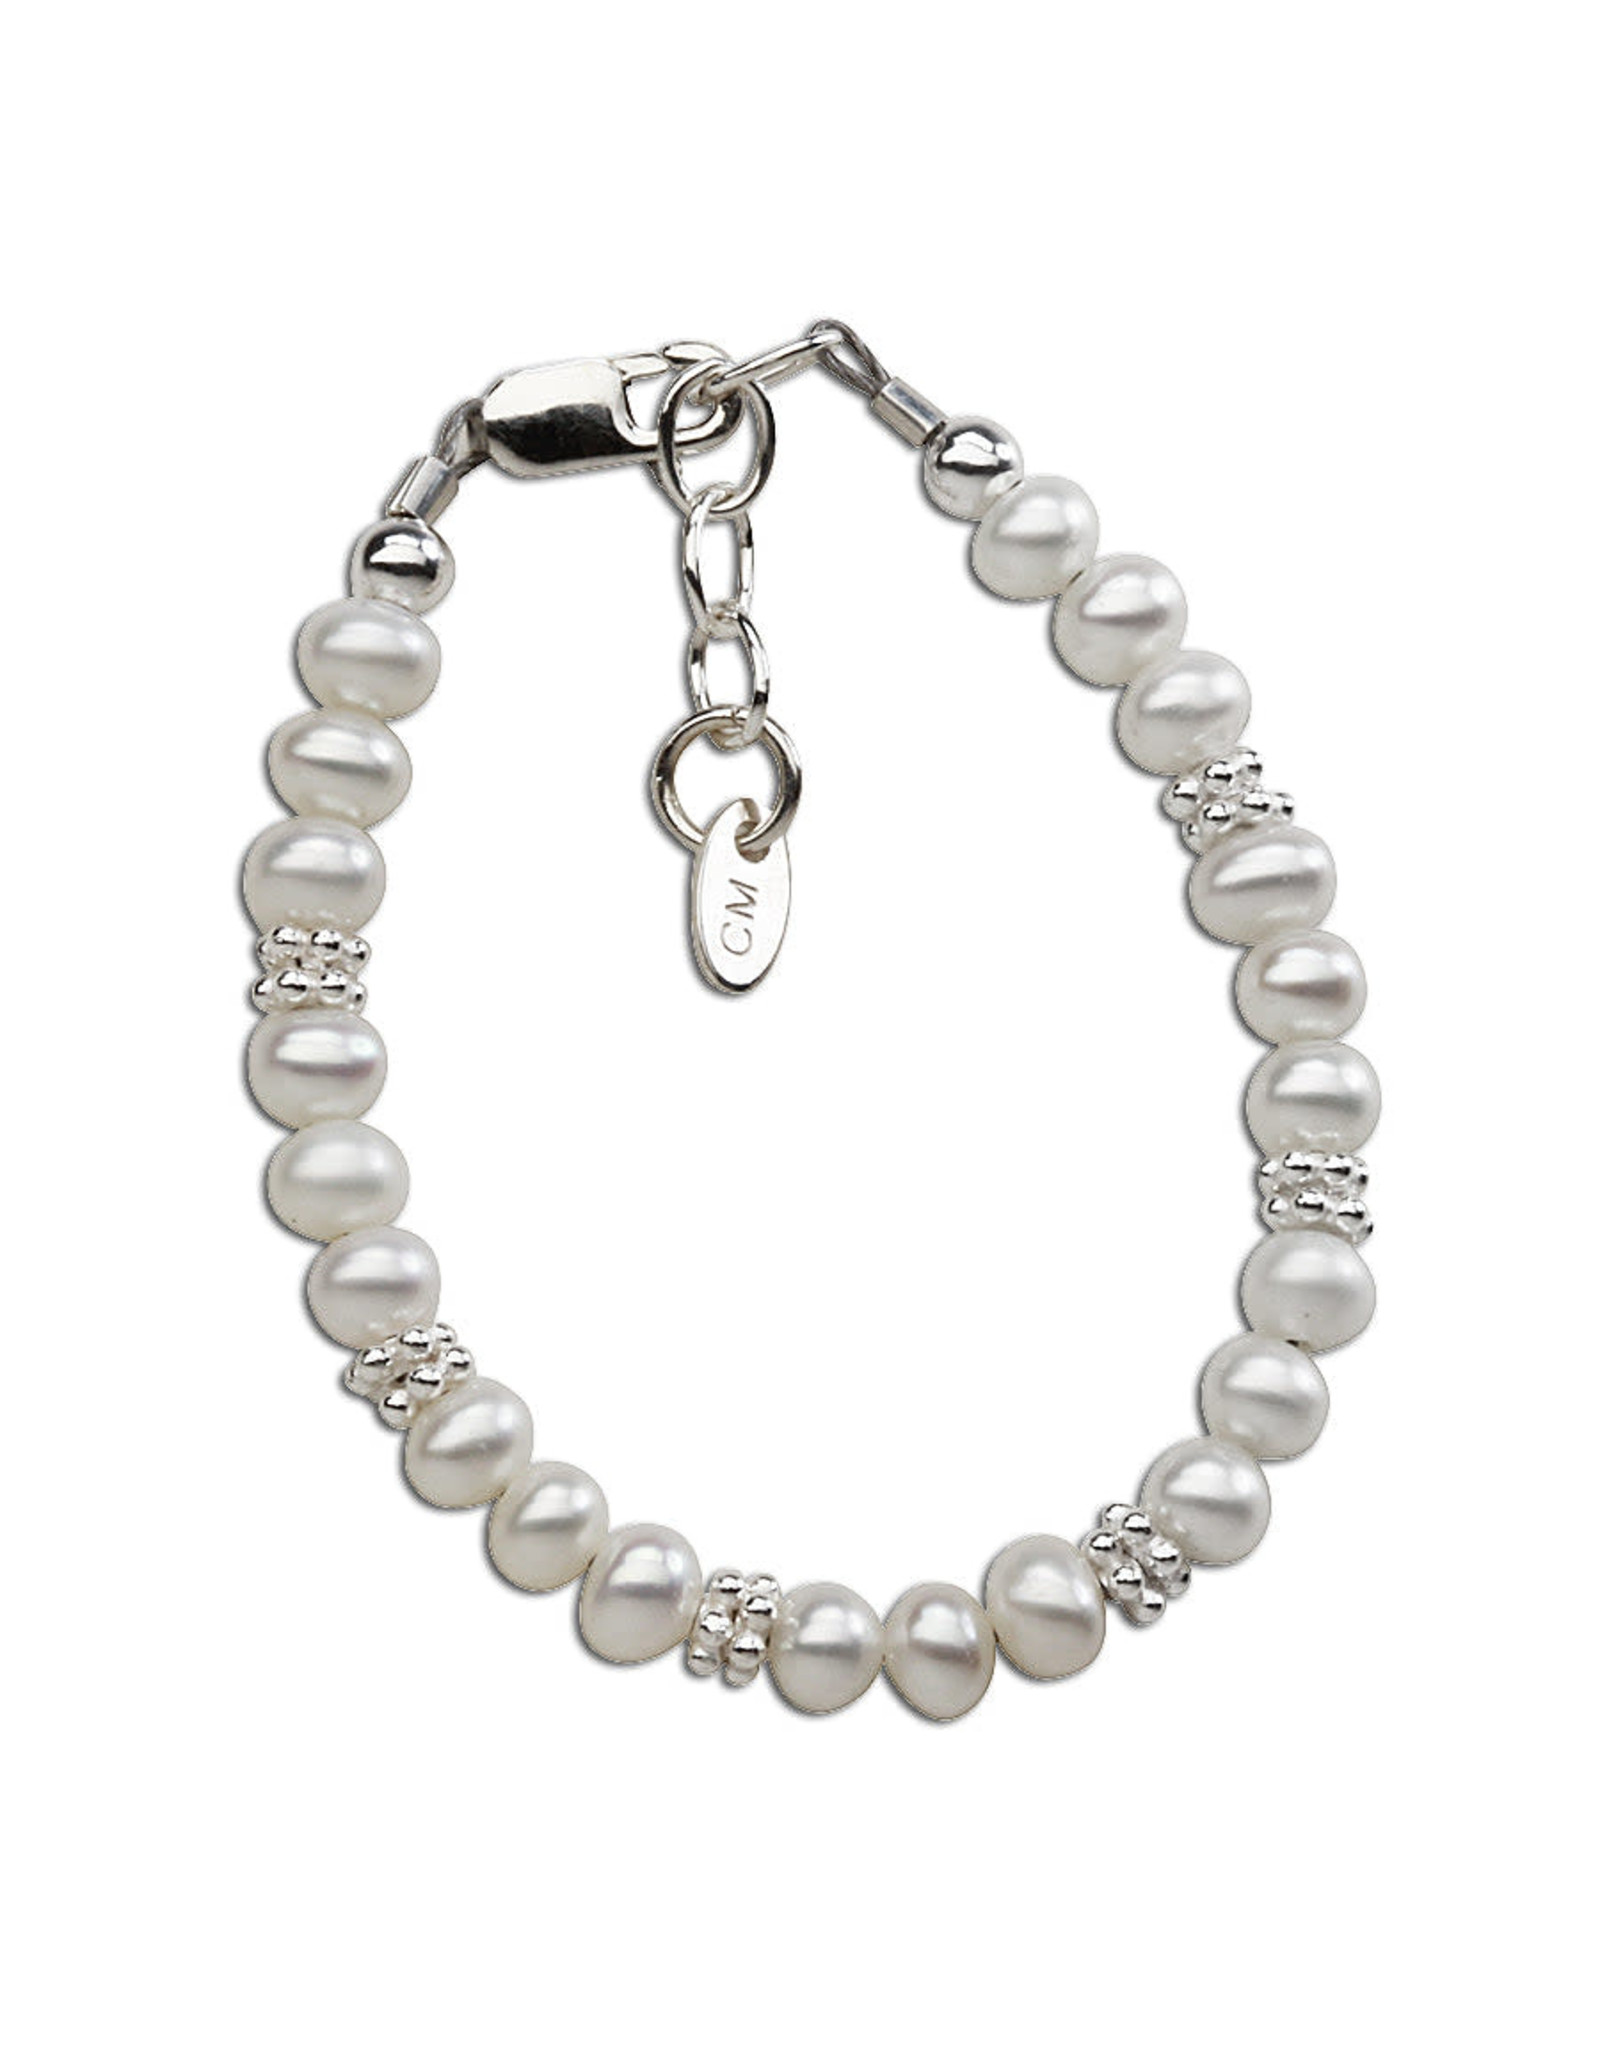 Victoria Silver Bracelet with Freshwater Pearls & Daisy Accents